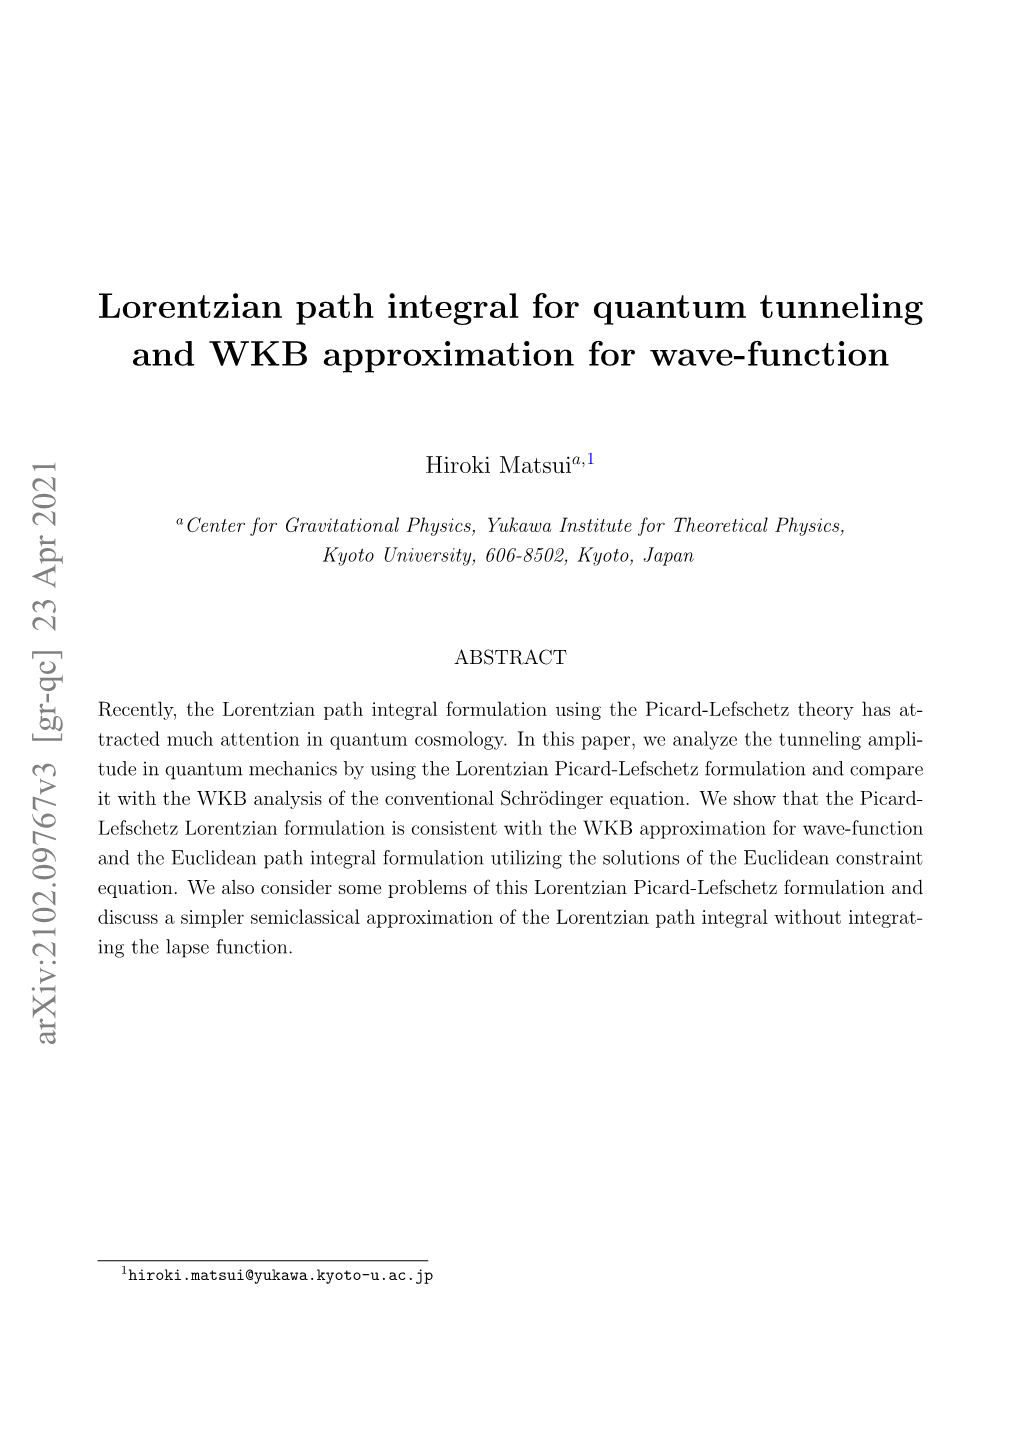 Lorentzian Path Integral for Quantum Tunneling and WKB Approximation for Wave-Function